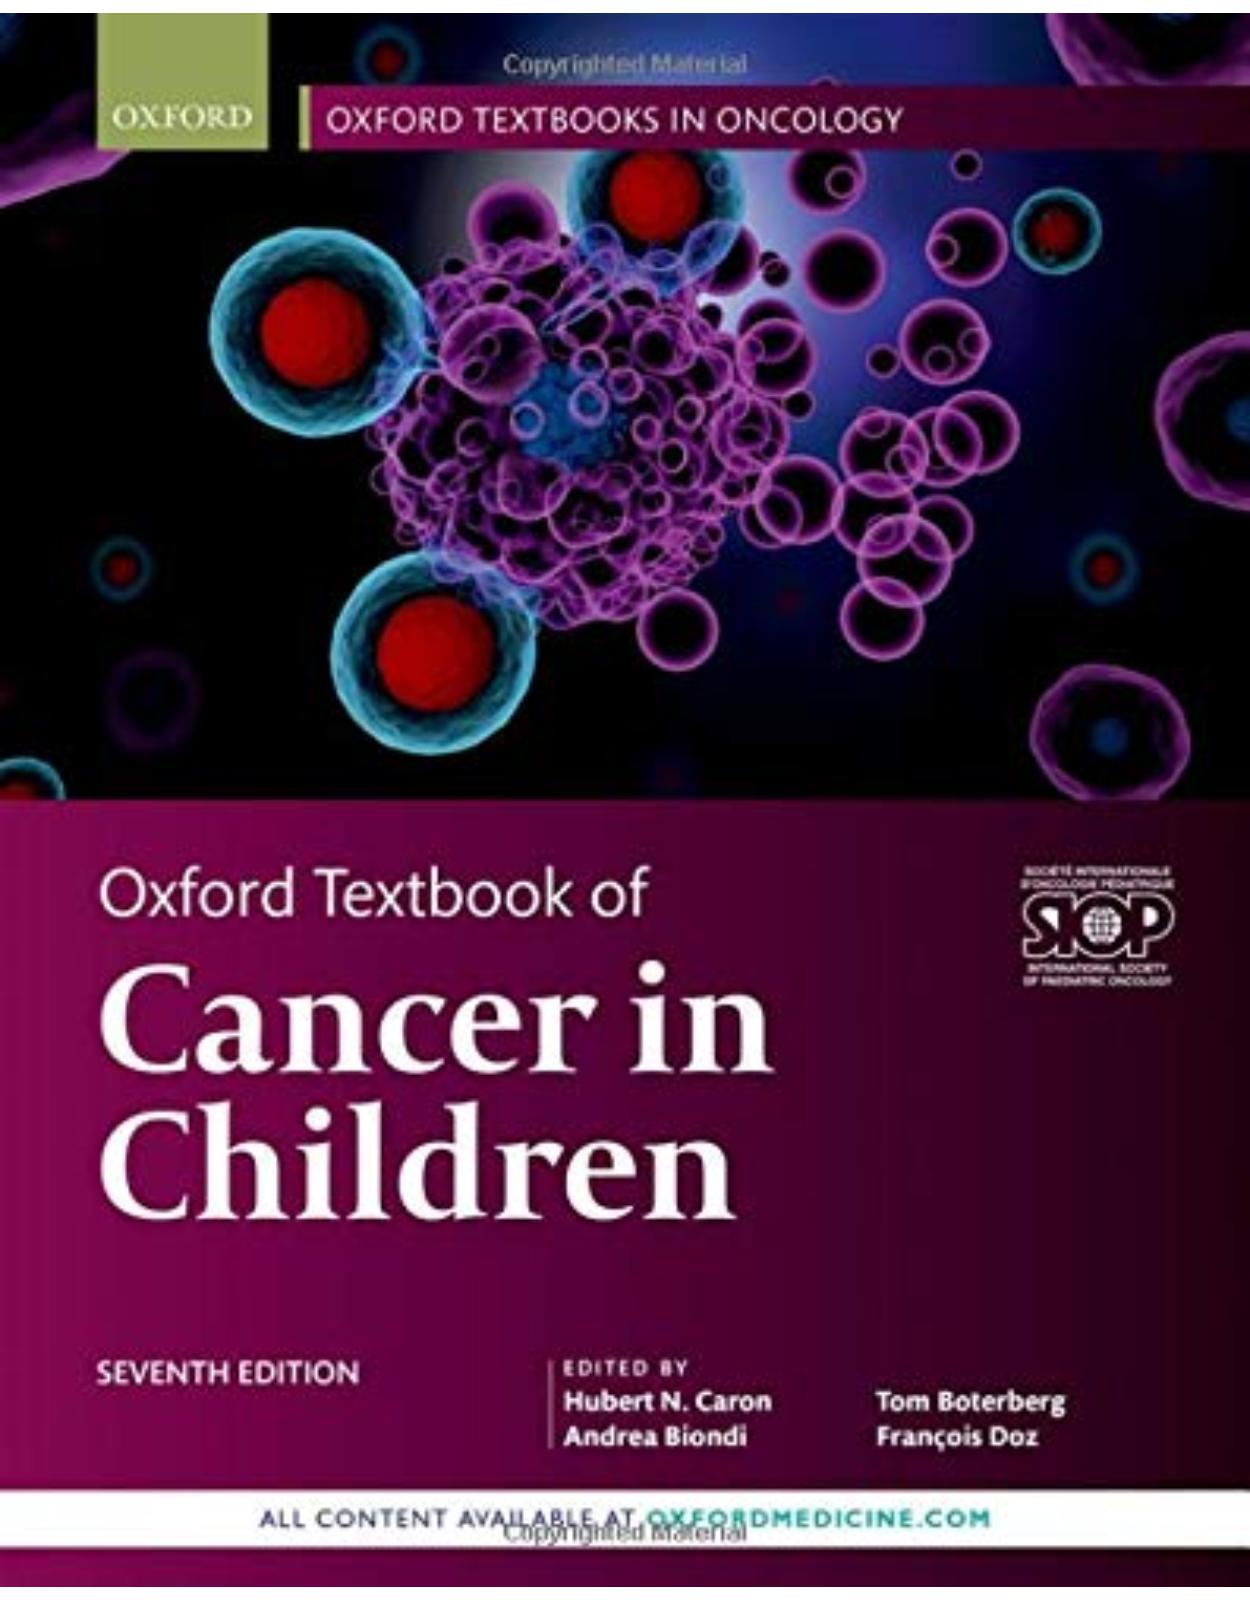 Oxford Textbook of Cancer in Children